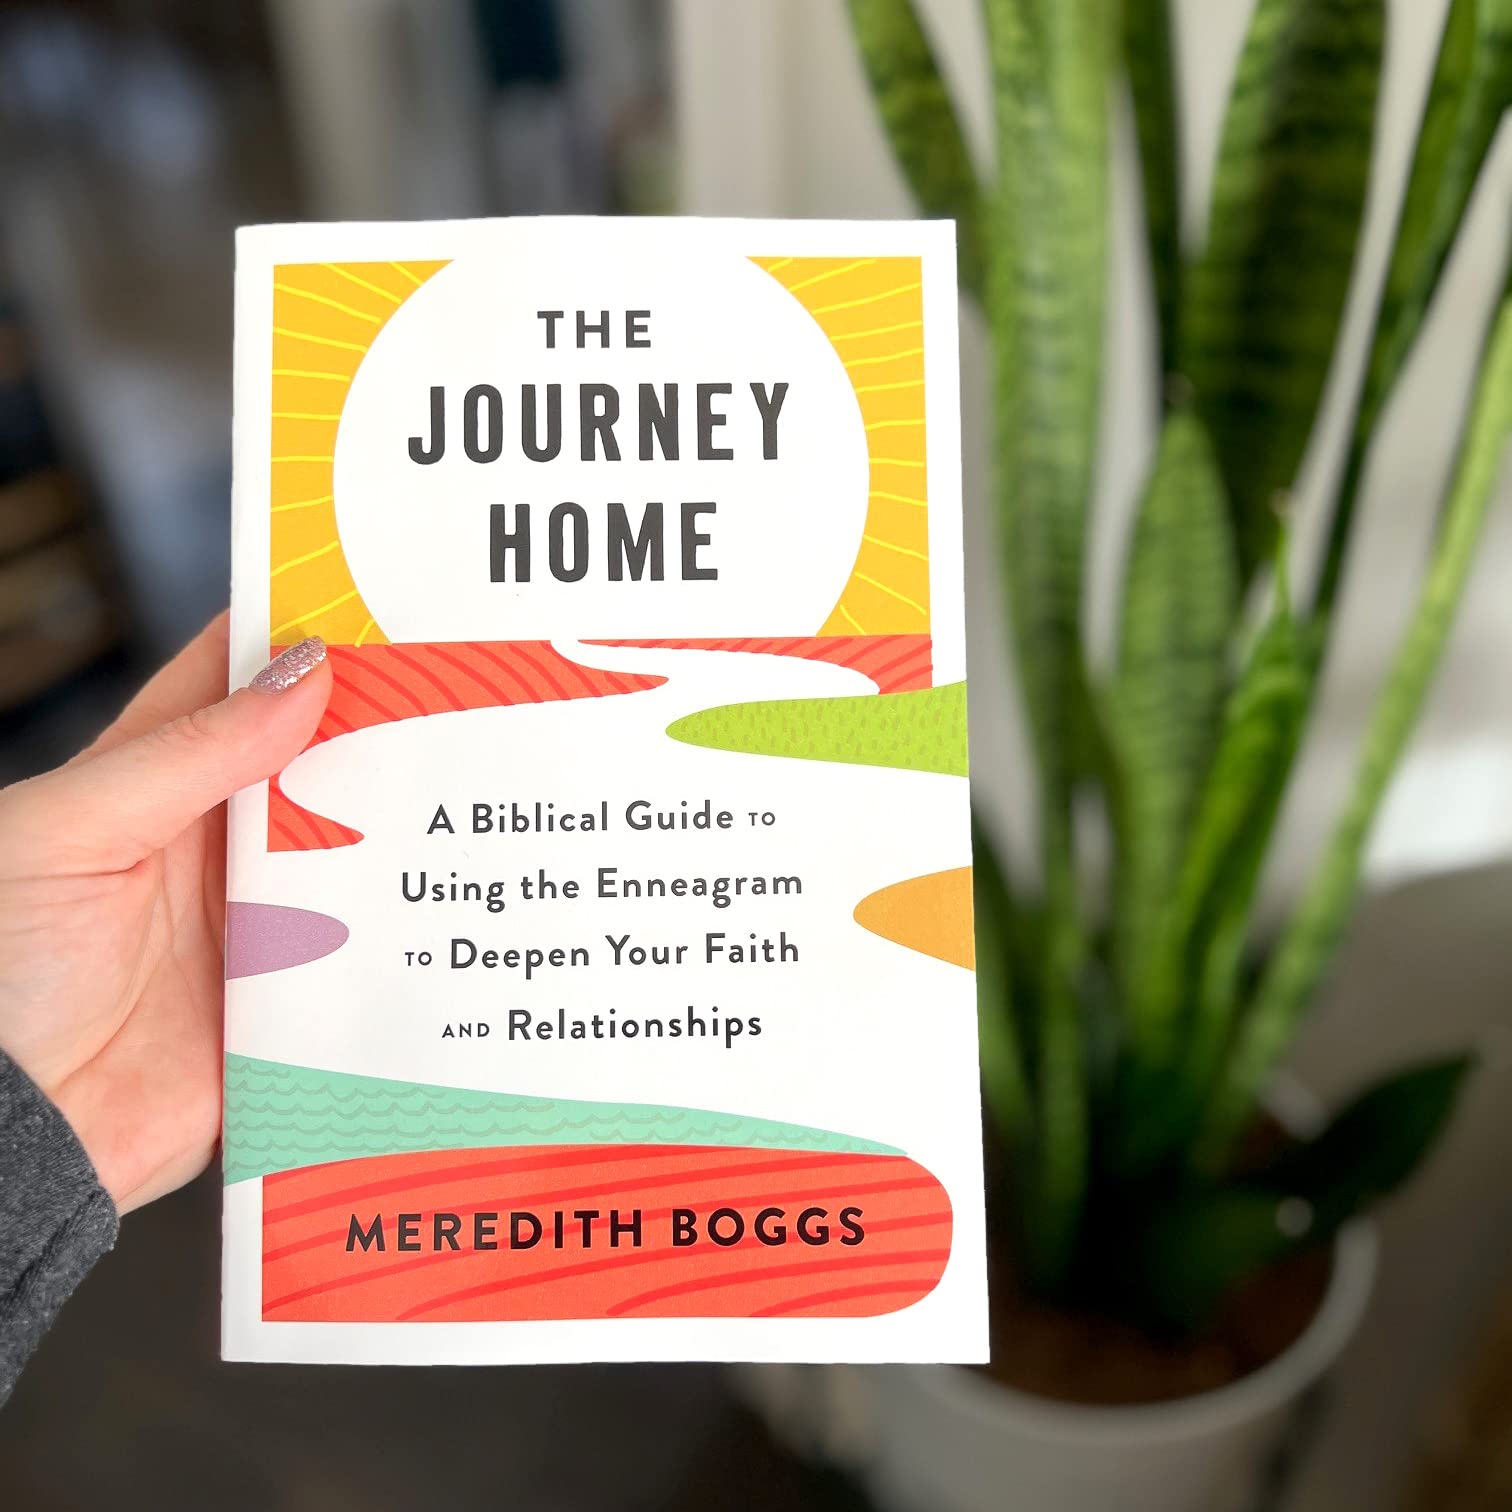 The Journey Home: A Biblical Guide to Using the Enneagram to Deepen Your Faith and Relationships